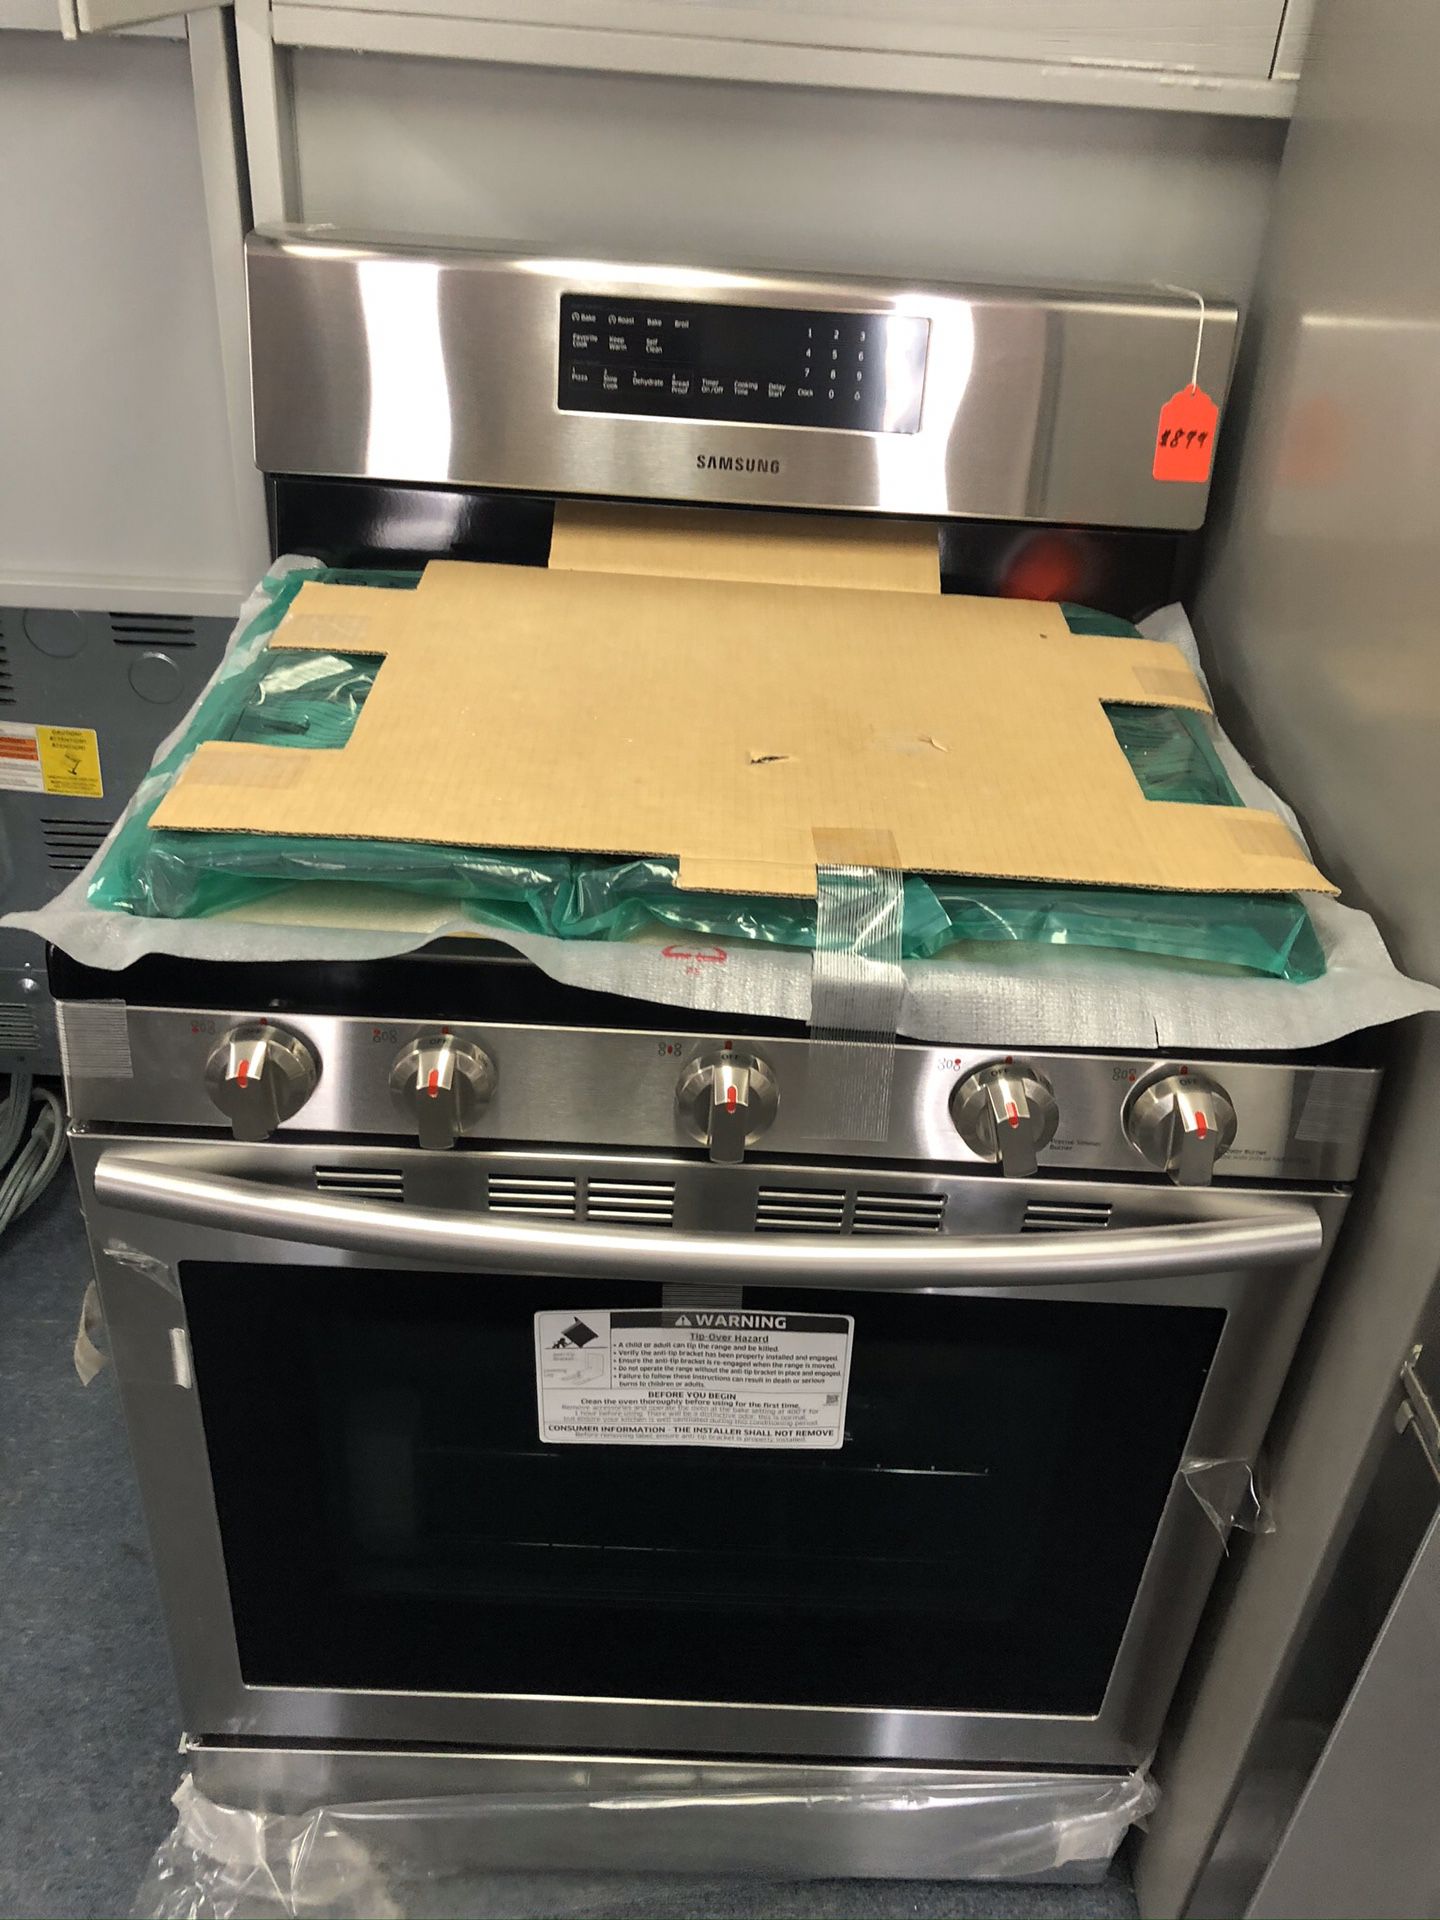 New scratch and dent Samsung gas range stainless steel. 1 year warranty